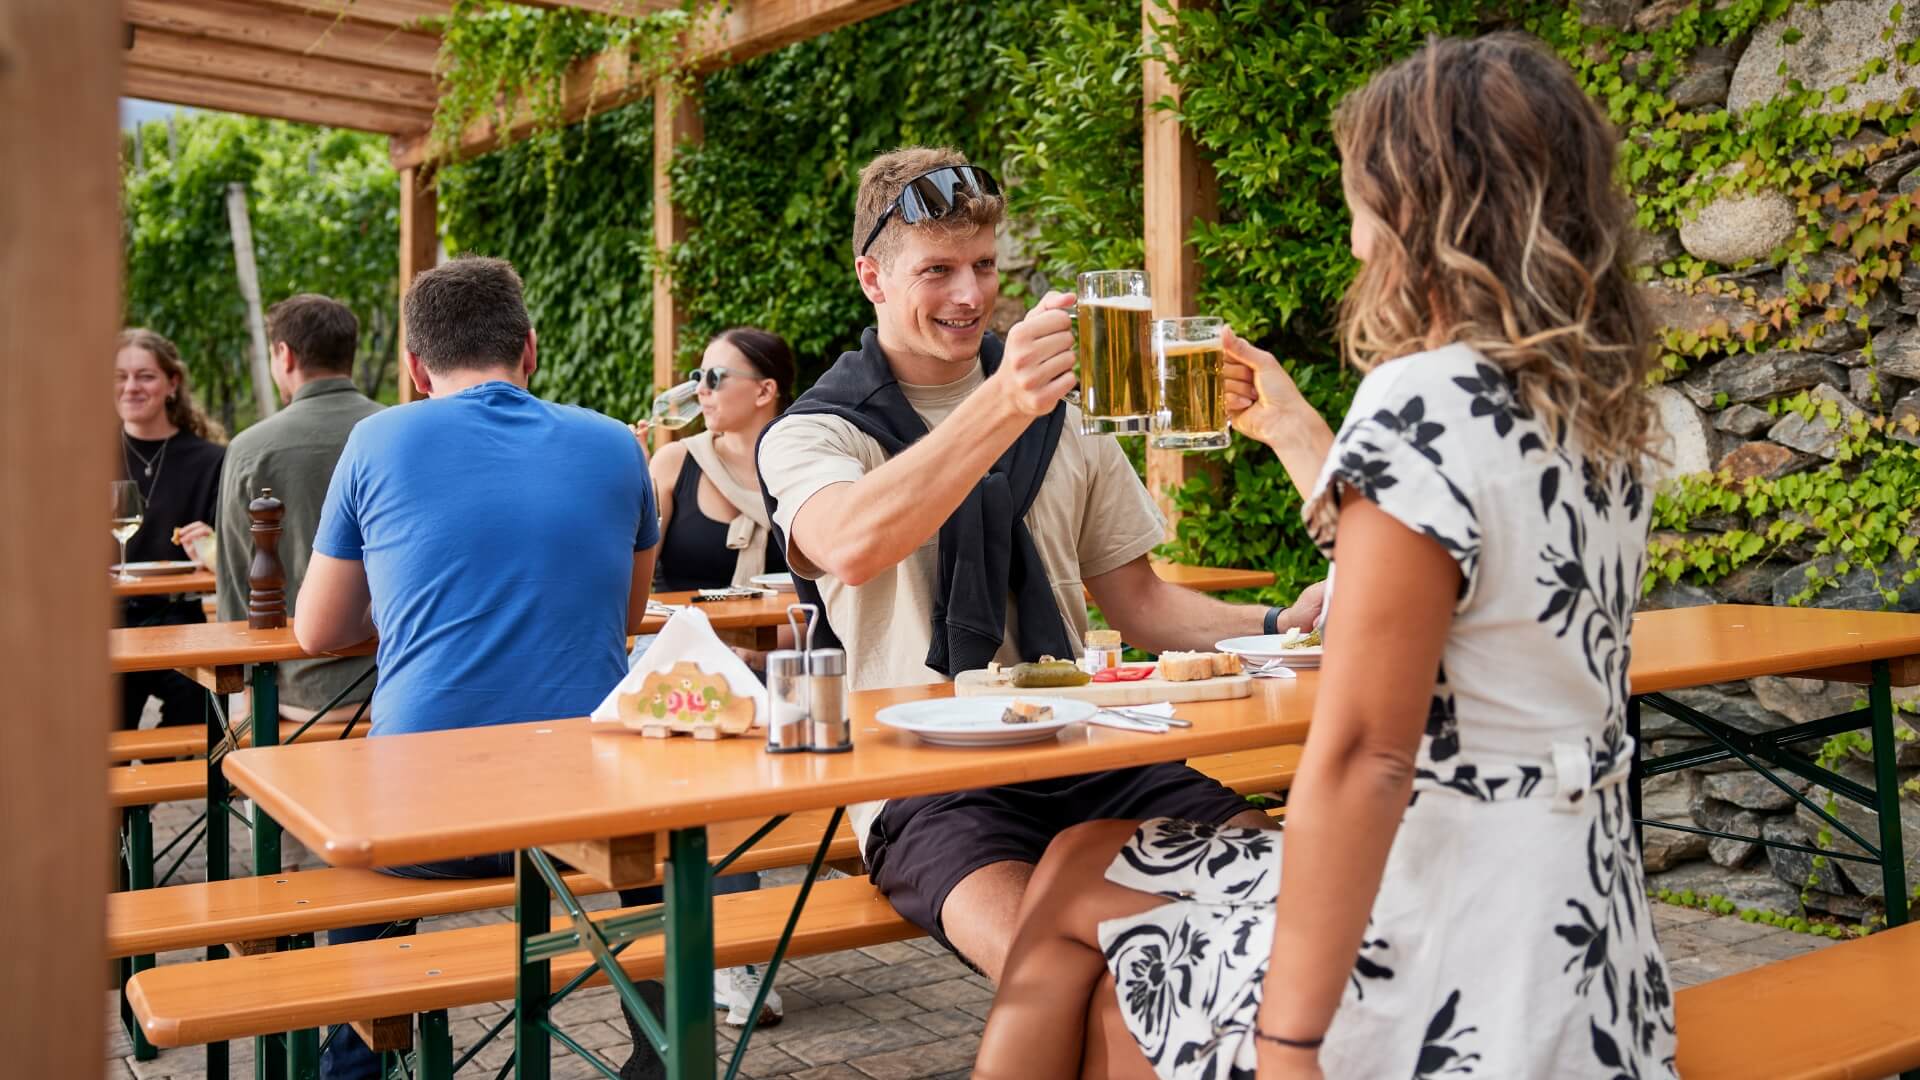 Several people enjoy the Marende and the beer at the Guggerhof on the classic beer garden table sets.